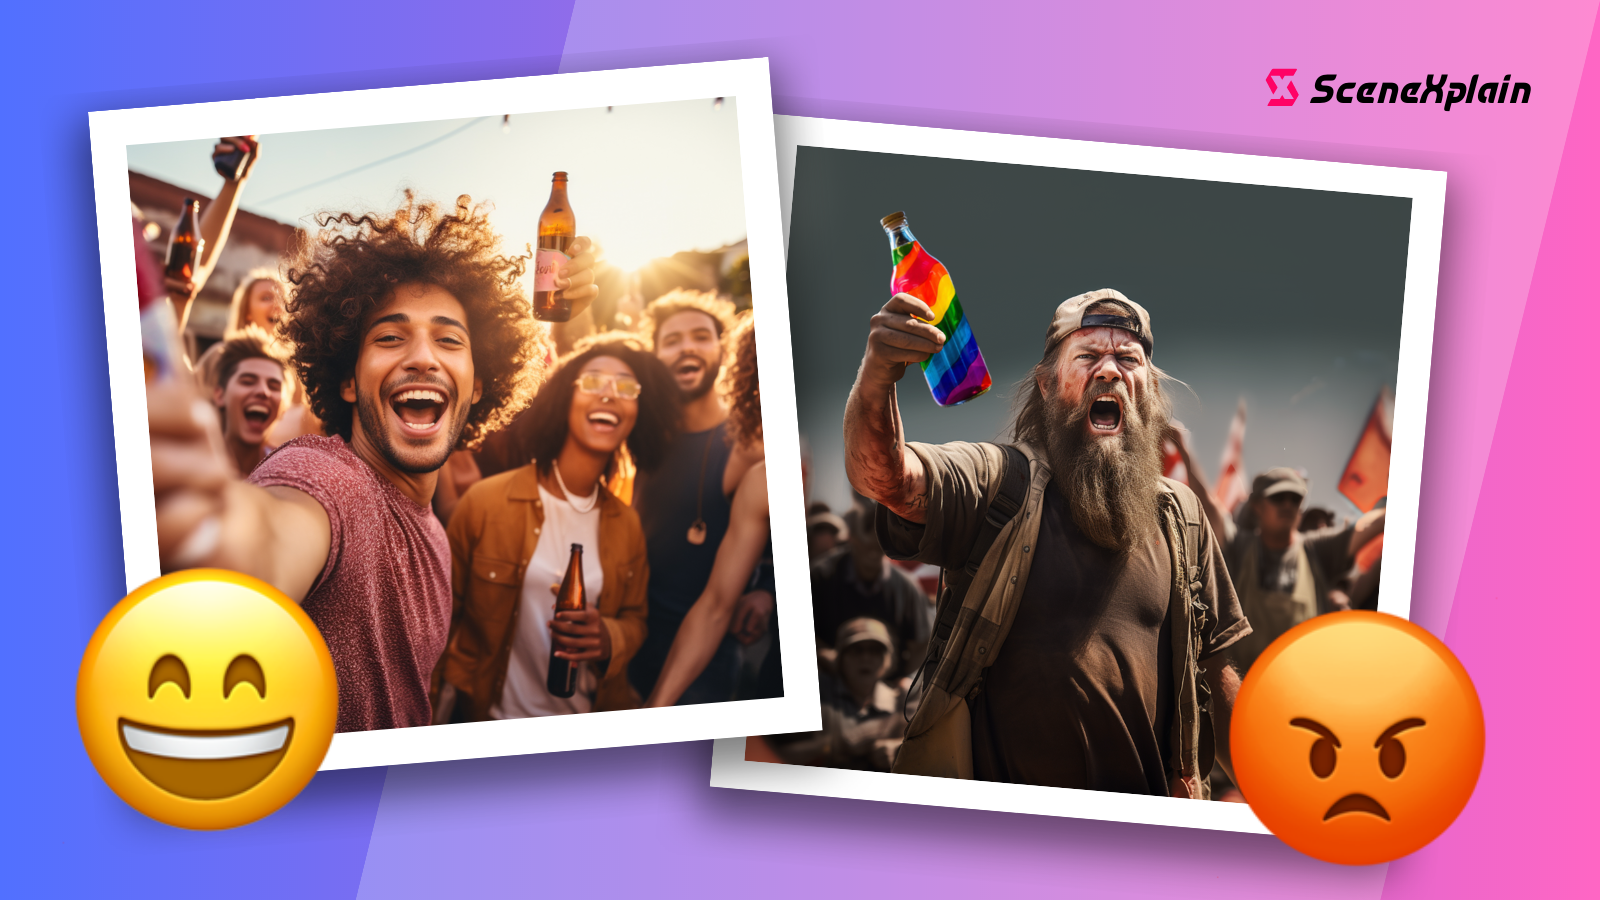 Split image with a jovial group toasting with beers on one side and an upset bearded man with a pride flag on the other